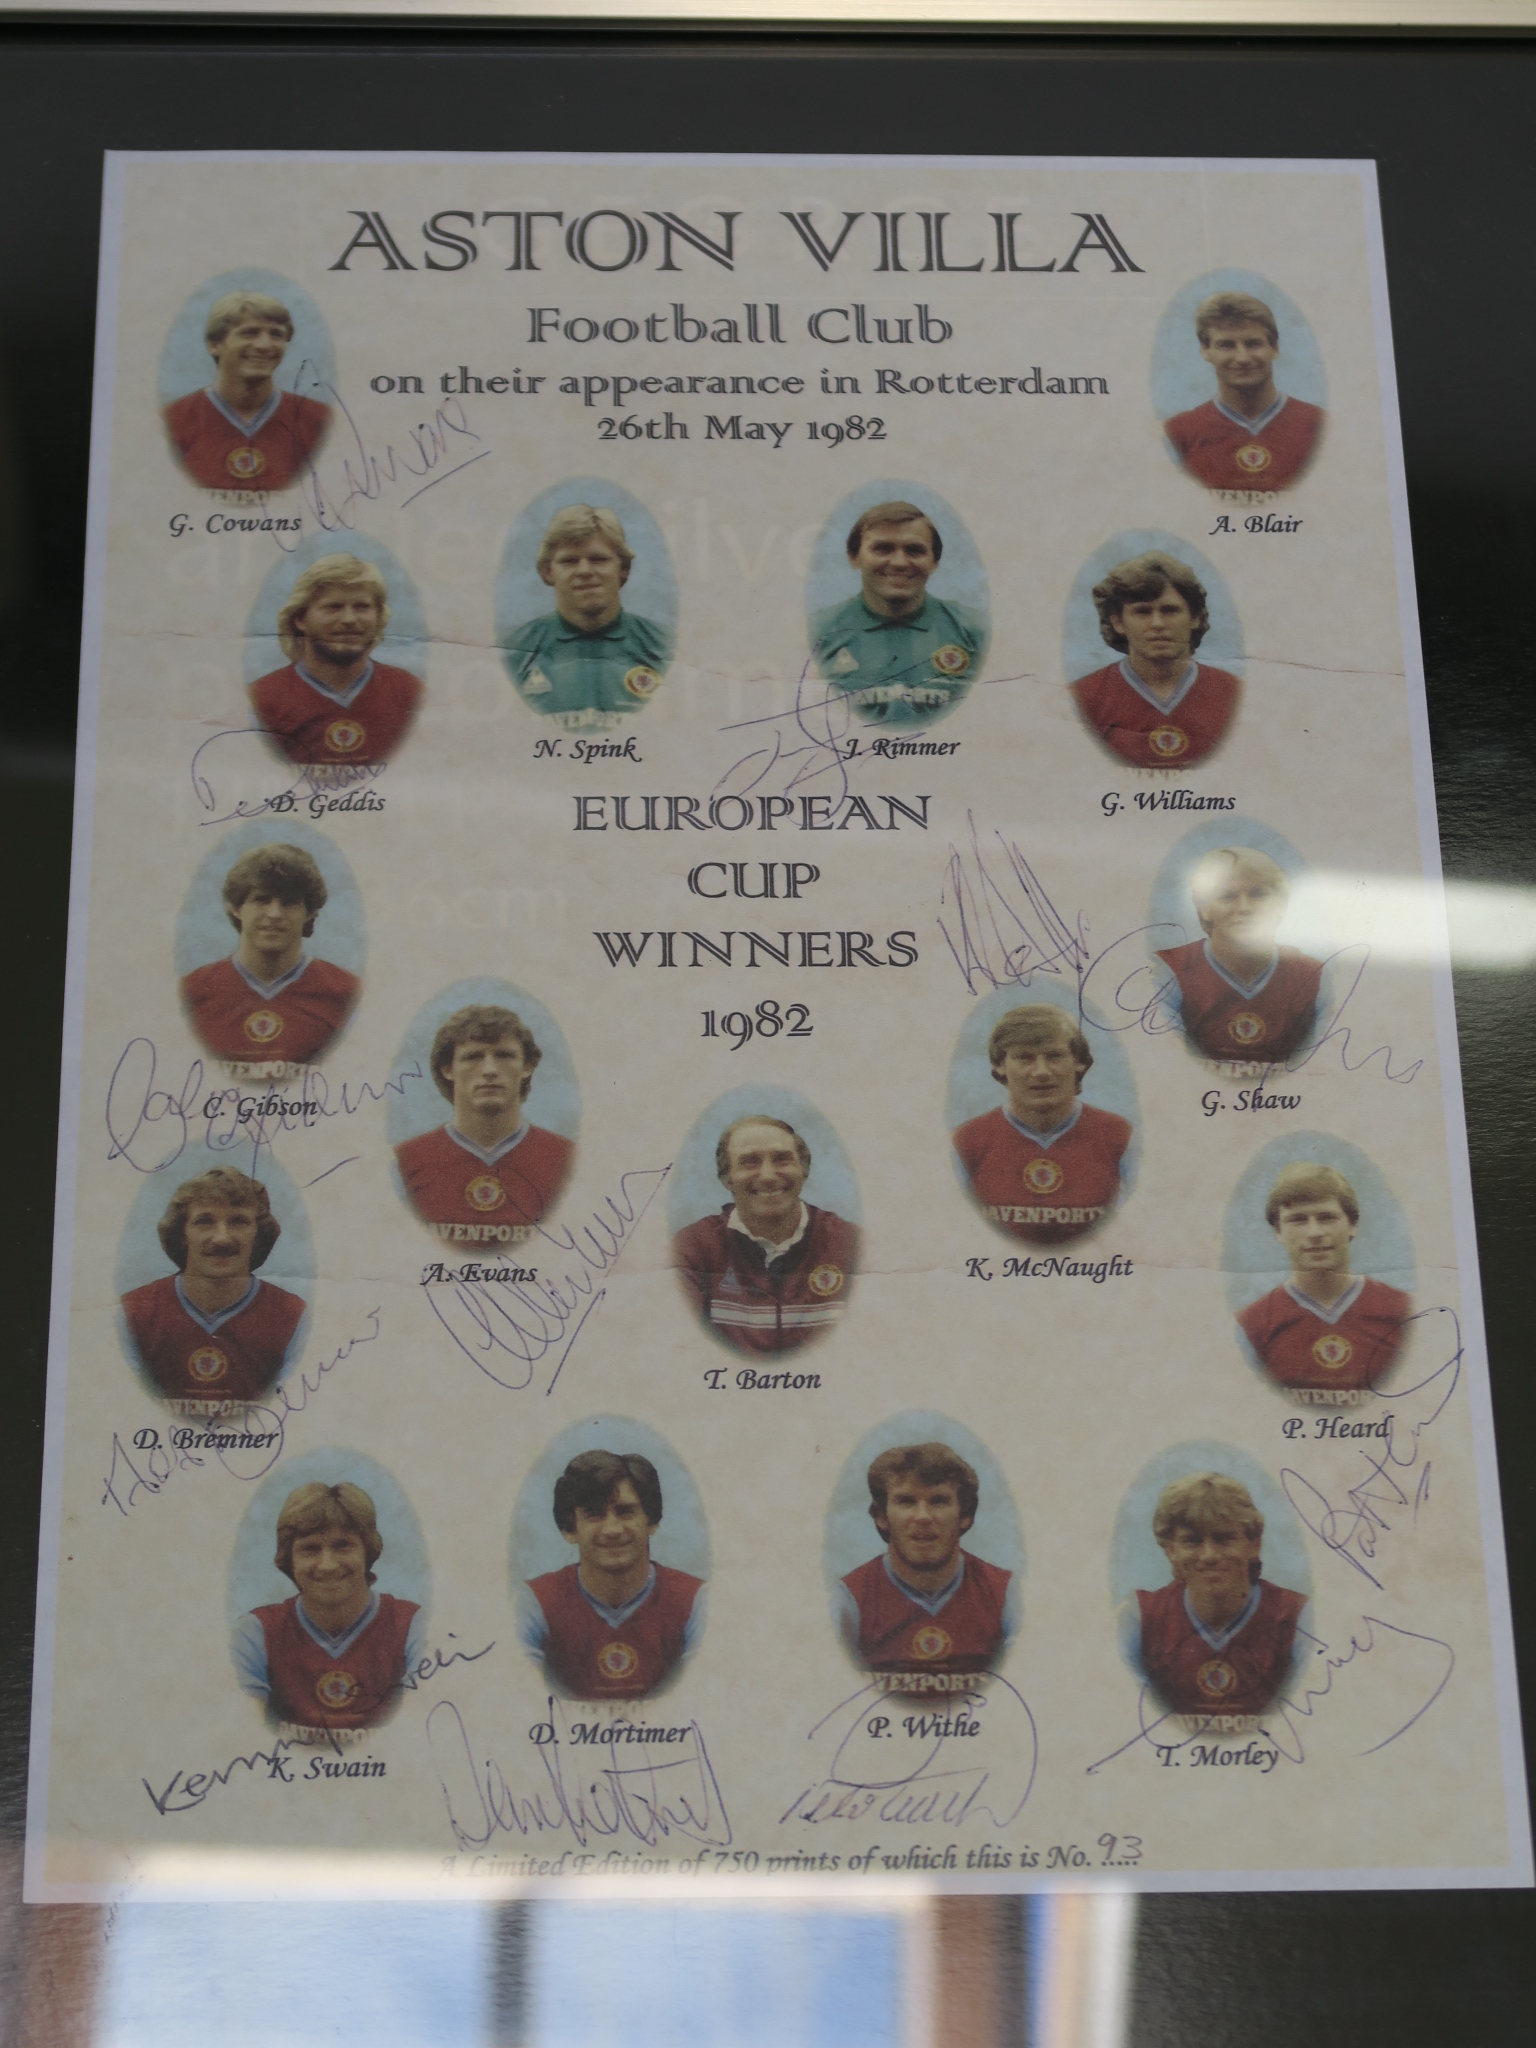 Aston Villa Football Club signed 26th May 1982 European Cup Winners limited edition print number 93 - Image 2 of 3